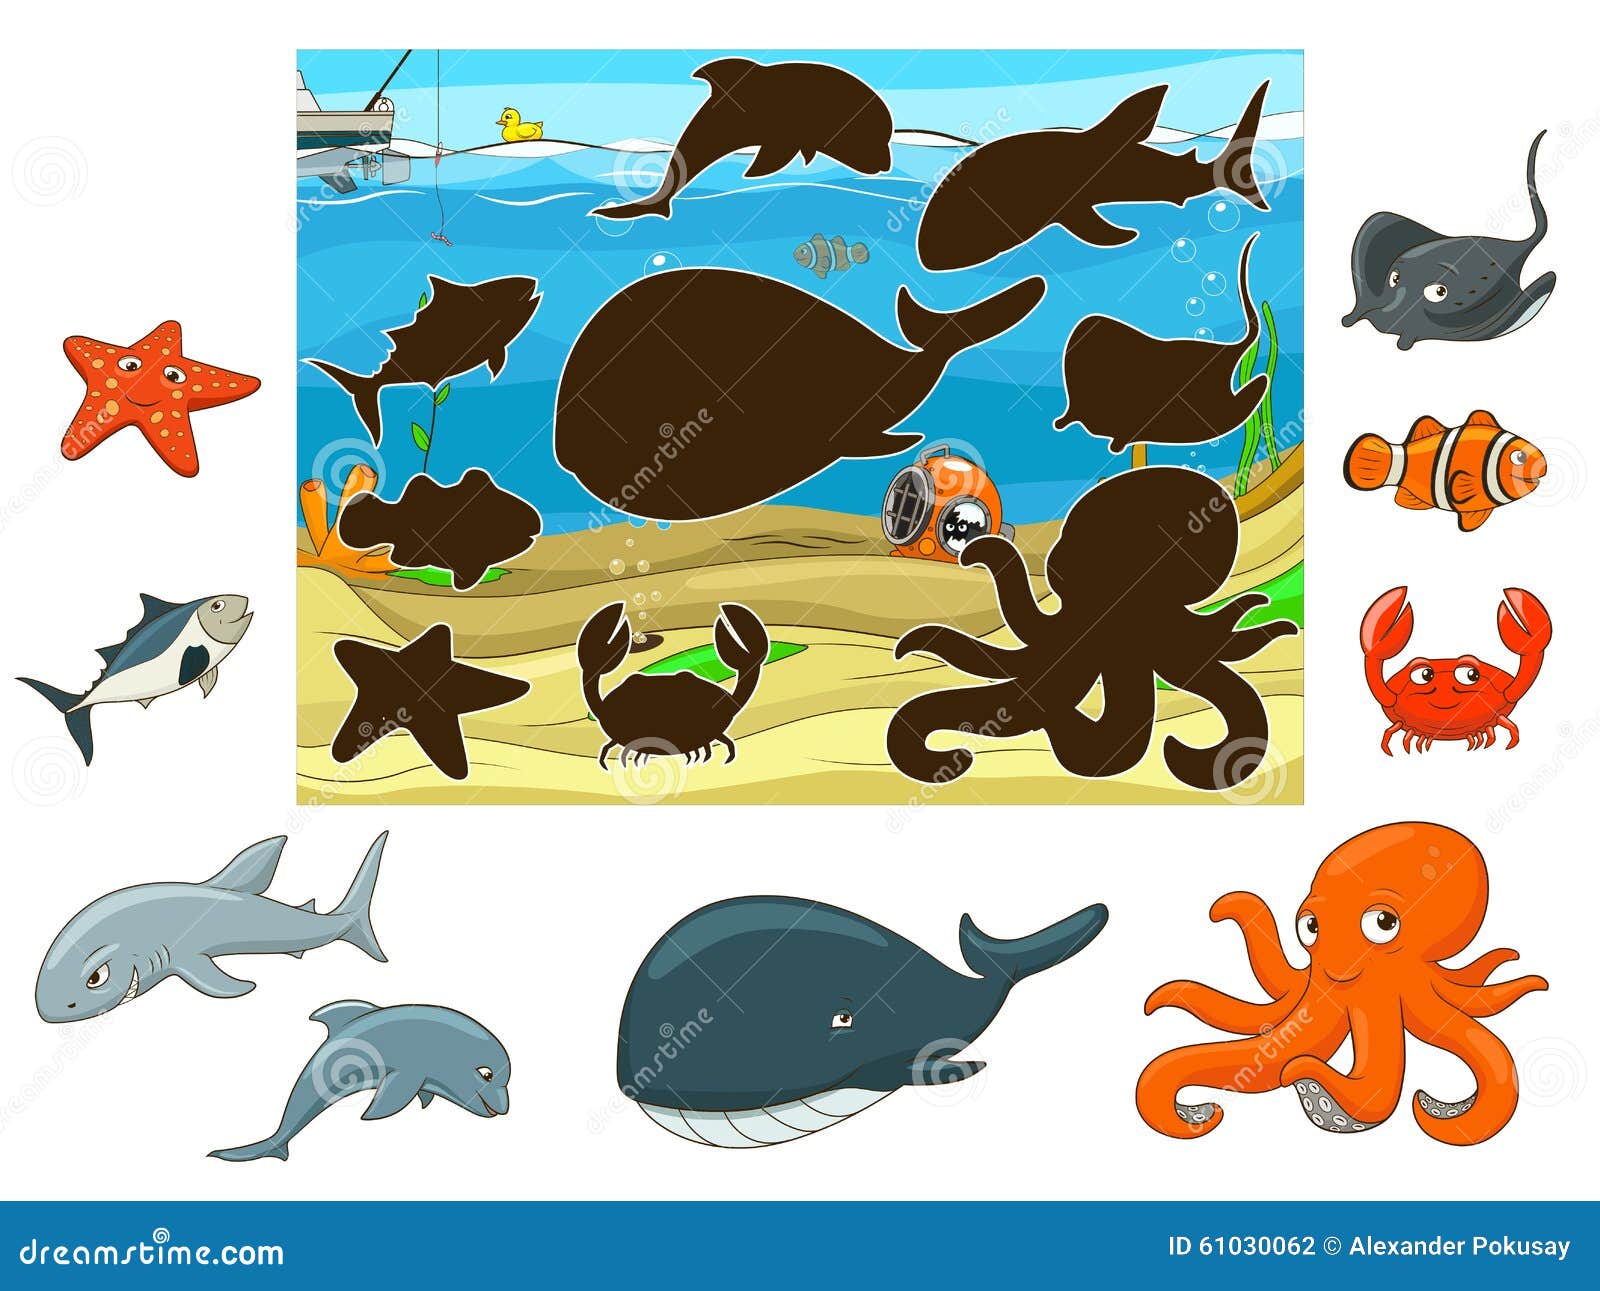 match the animals and fish to their shadows